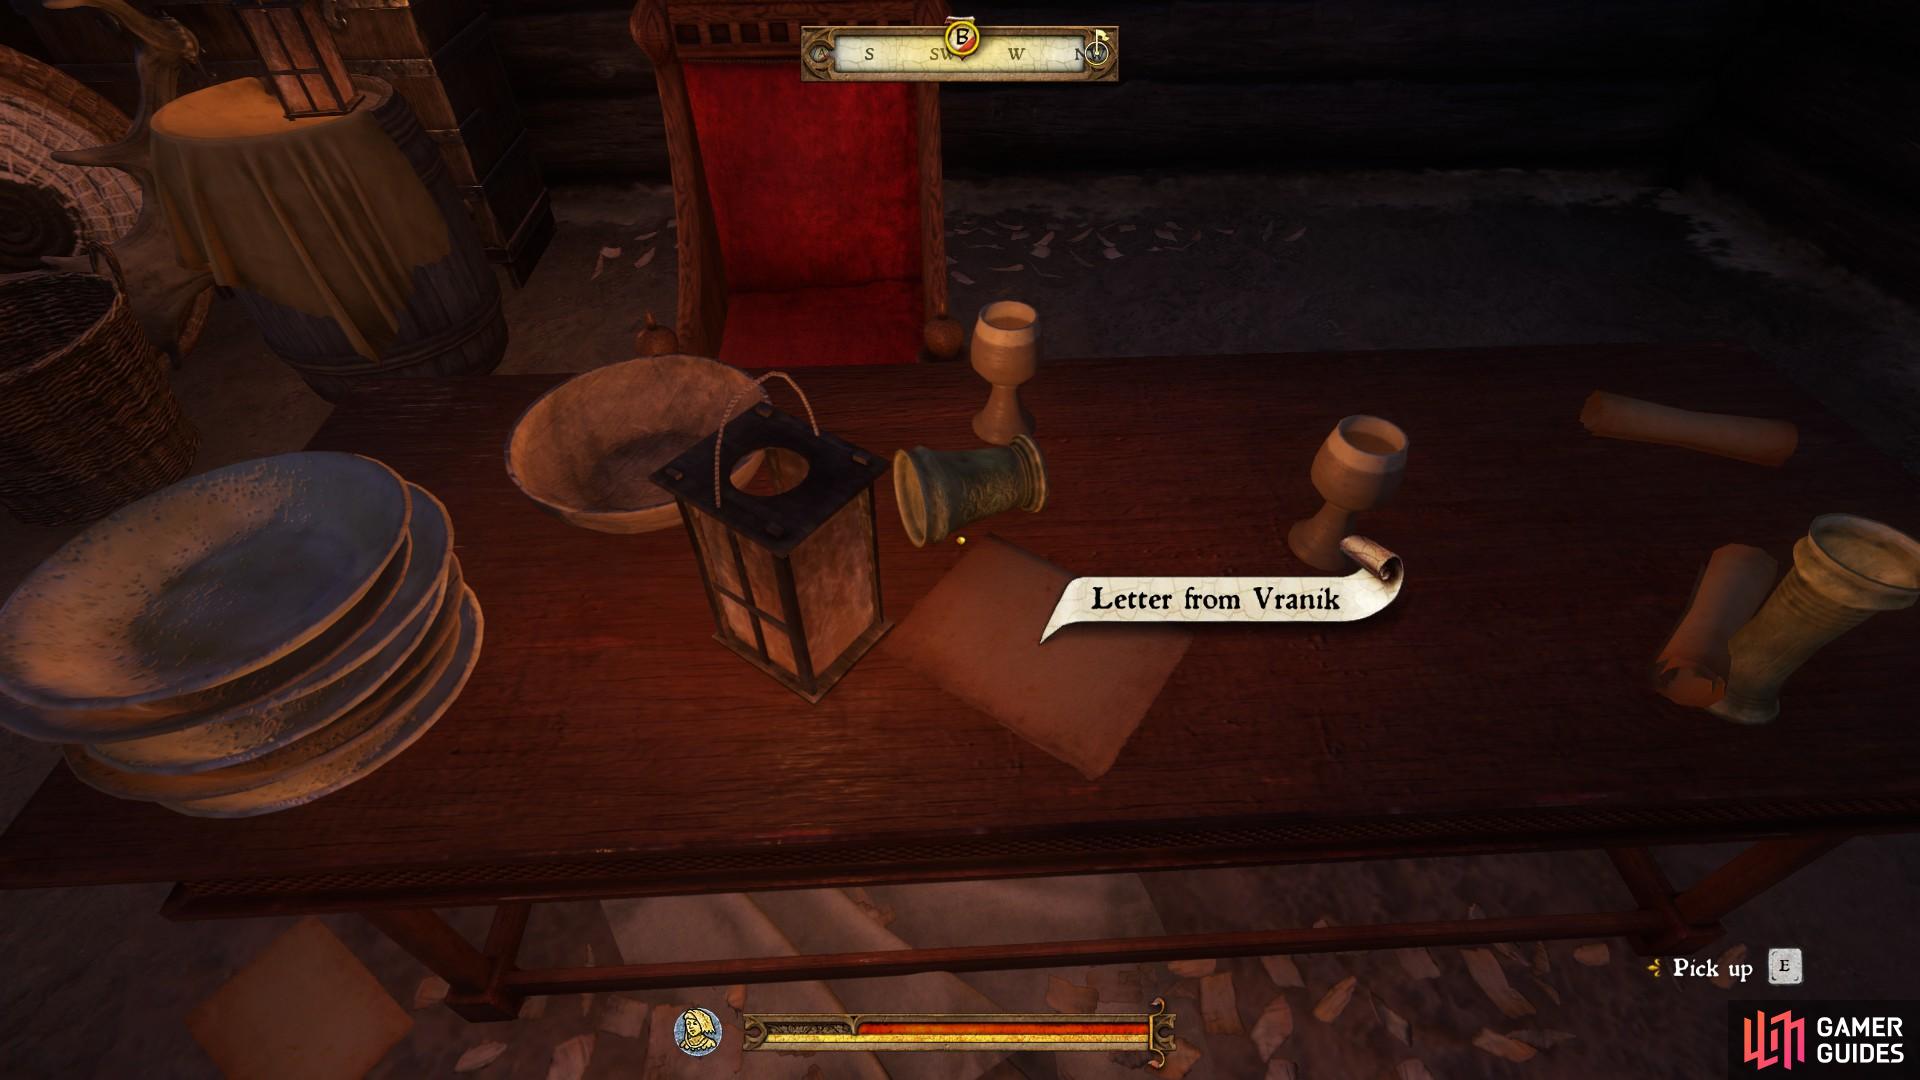 Go to the room where you first met Erik to find a letter on his table. Note that you can get your old equipment from the chest if you failed to do so during your escape.